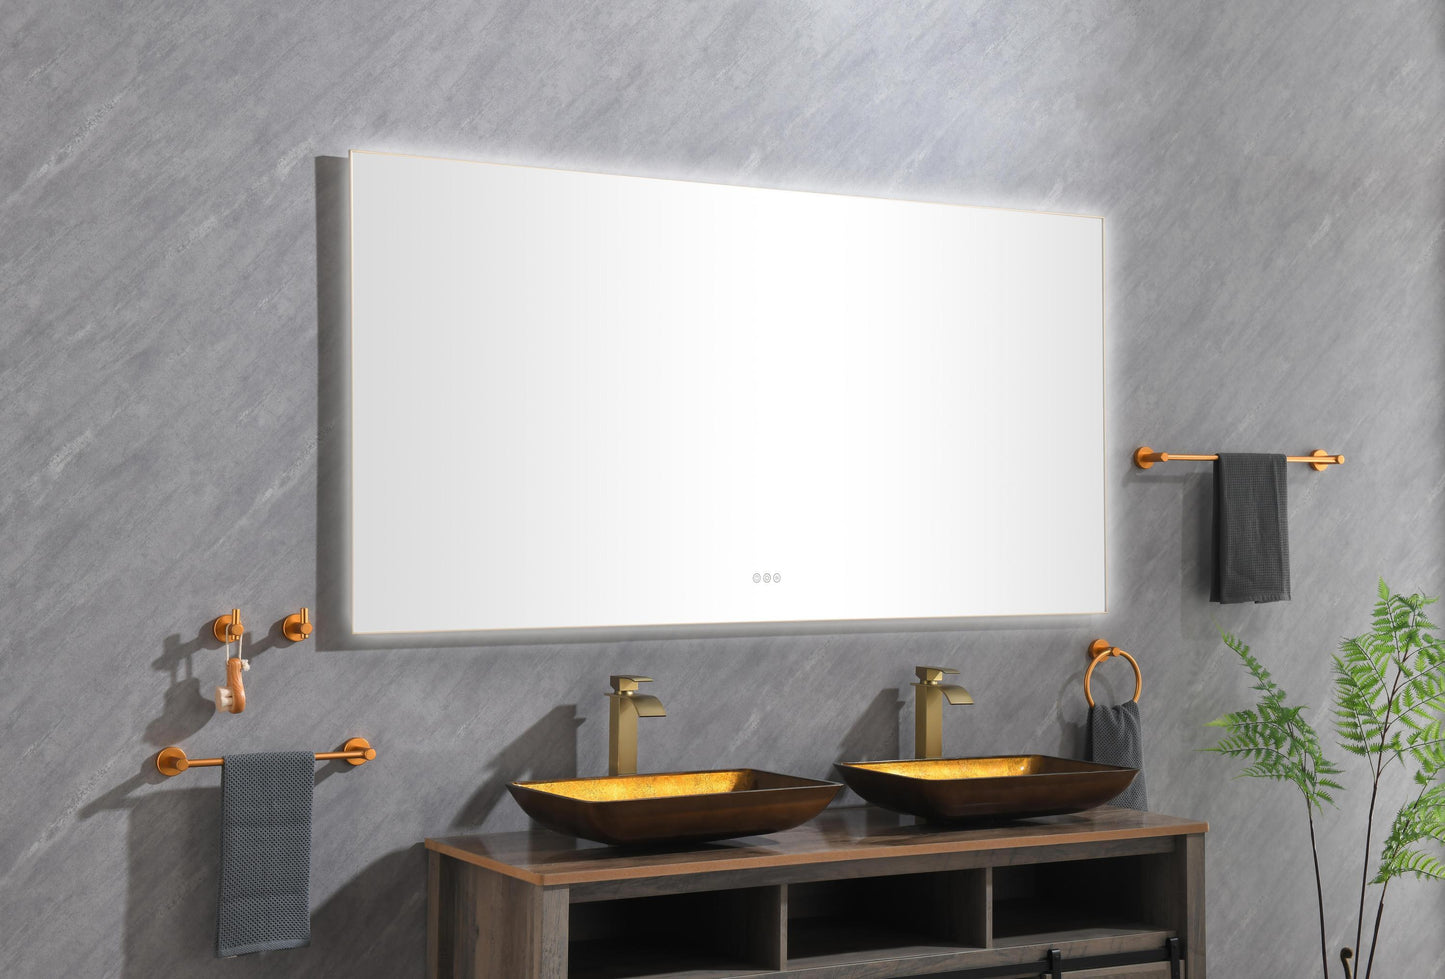 LTL needs to consult the warehouse addressSuper Bright Led Bathroom Mirror with Lights, Metal Frame Mirror Wall Mounted Lighted Vanity Mirrors for Wall, Anti Fog Dimmable Led Mirror for Makeup